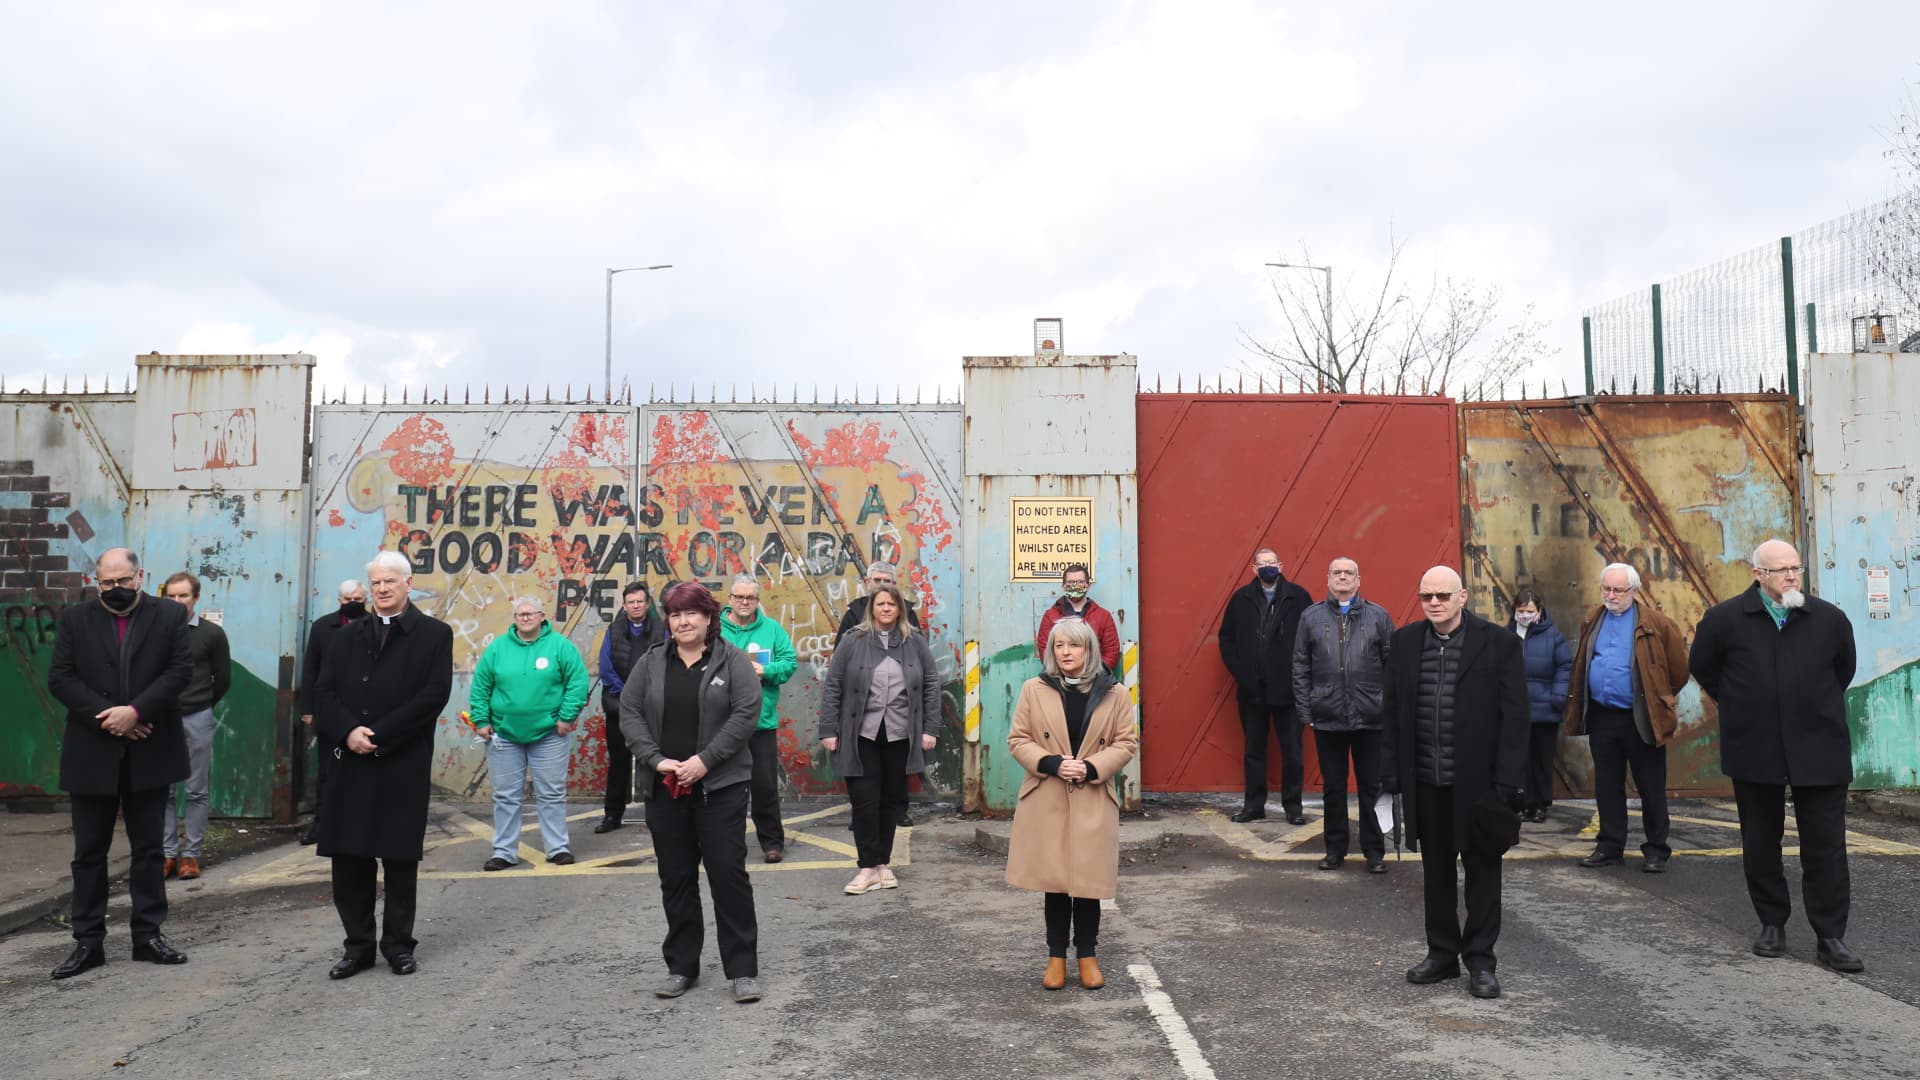 BELFAST - Members of the clergy at the peace wall on Lanark Way in Belfast following a Ecumencial service in response to the recent riots and violence in the city